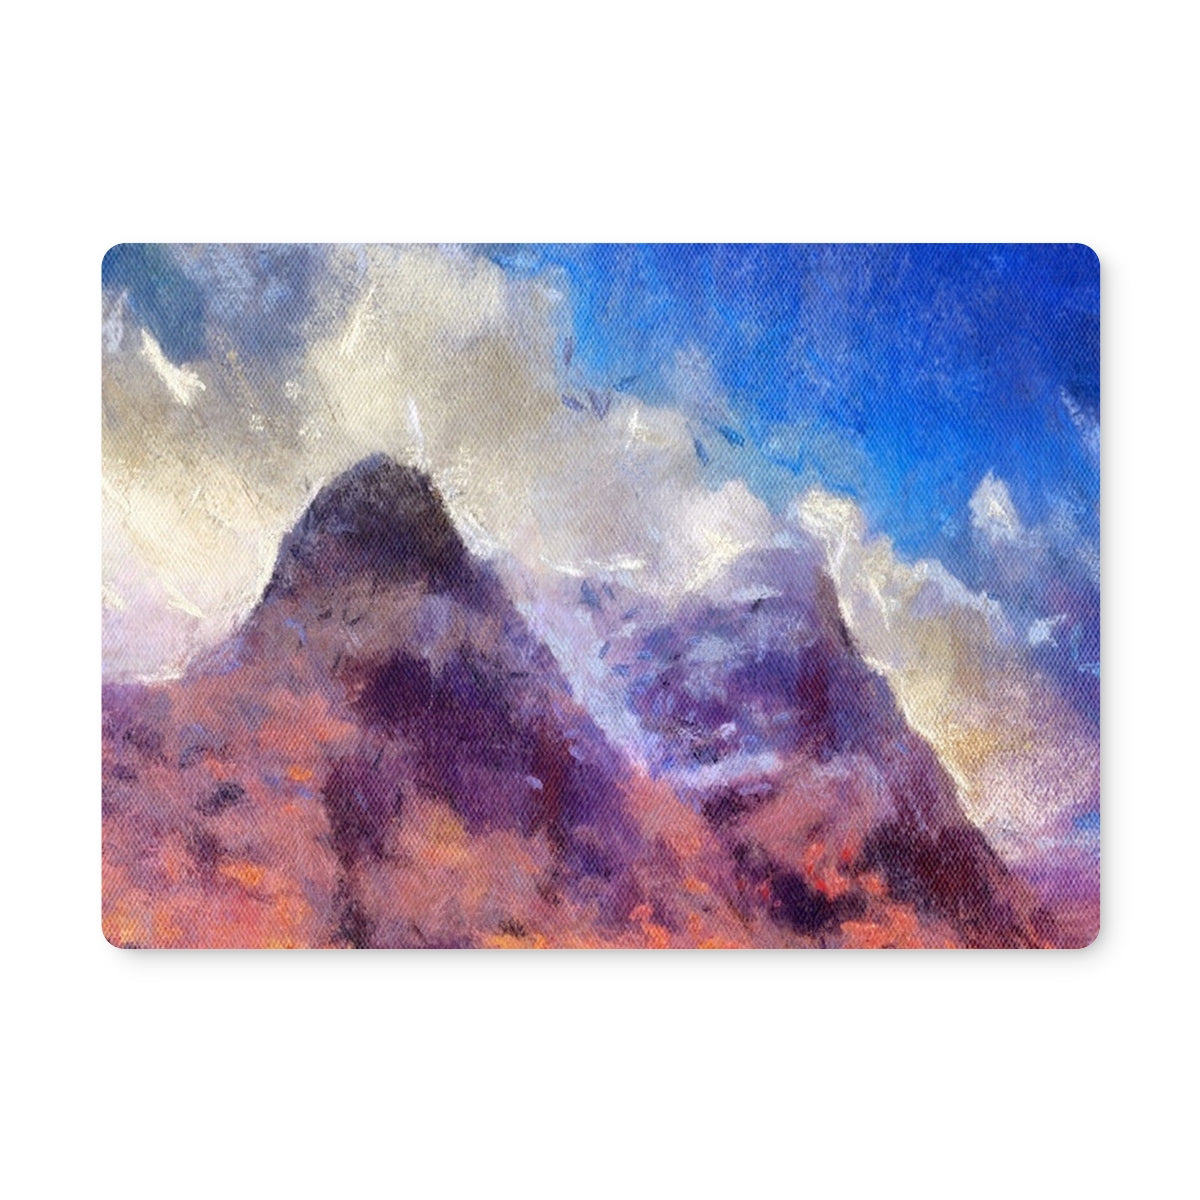 Glencoe Art Gifts Placemat-Placemats-Glencoe Art Gallery-4 Placemats-Paintings, Prints, Homeware, Art Gifts From Scotland By Scottish Artist Kevin Hunter